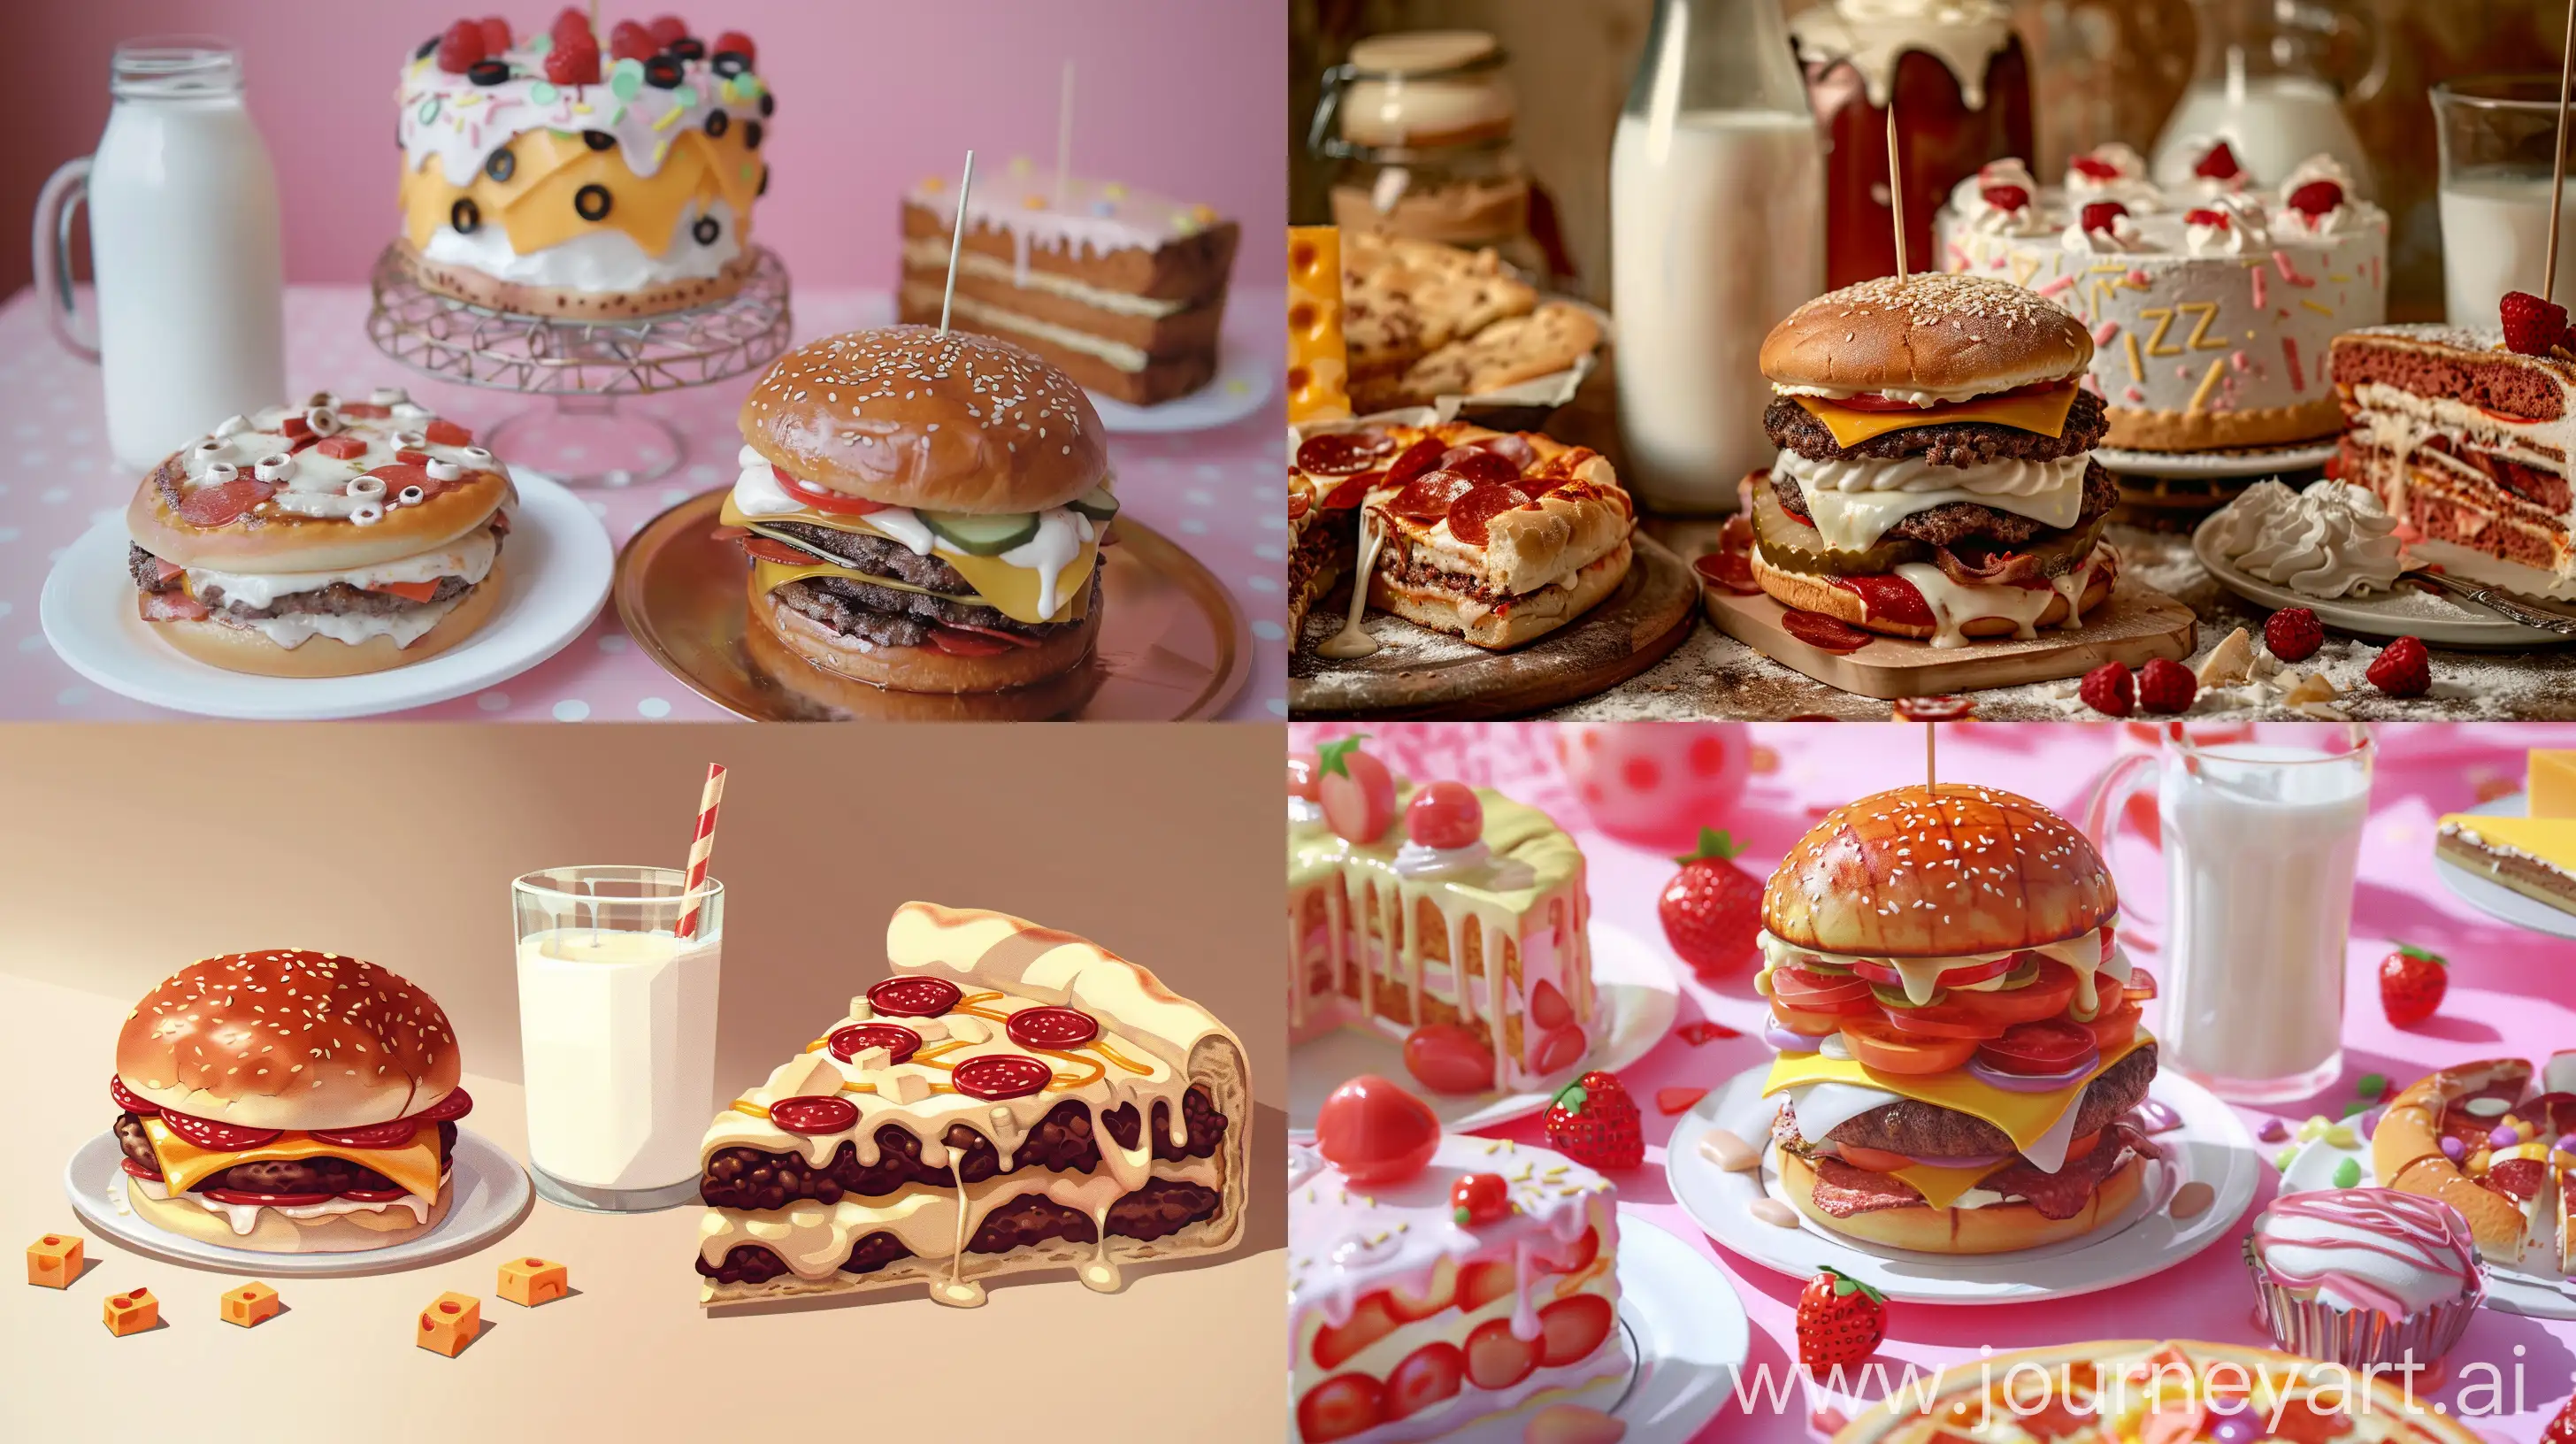 Delicious-Fantasy-Feast-with-Burger-Pizza-Cake-Milk-and-Cheese